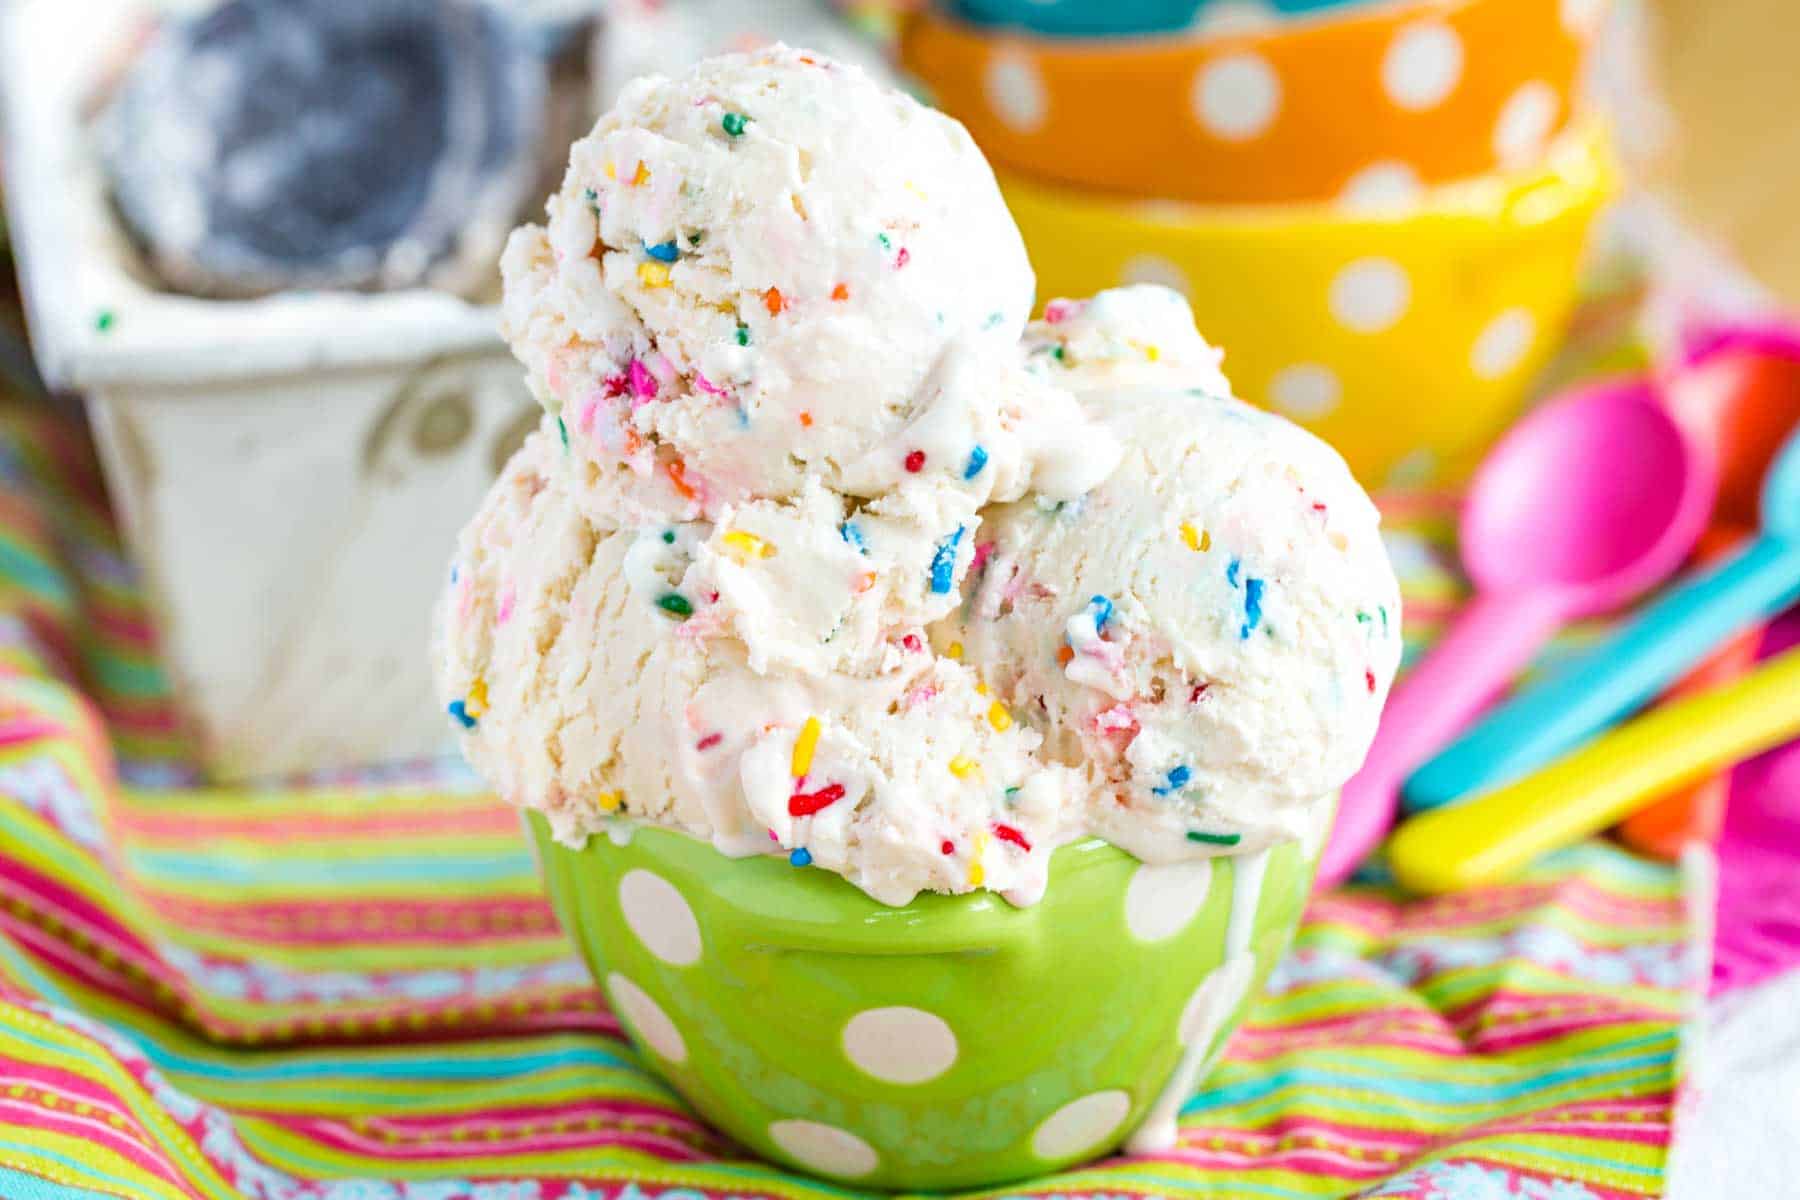 Ice Cream filled with rainbow sprinkles in a green polka dot bowl with the ice cream container and more bowls and spoons in the background.